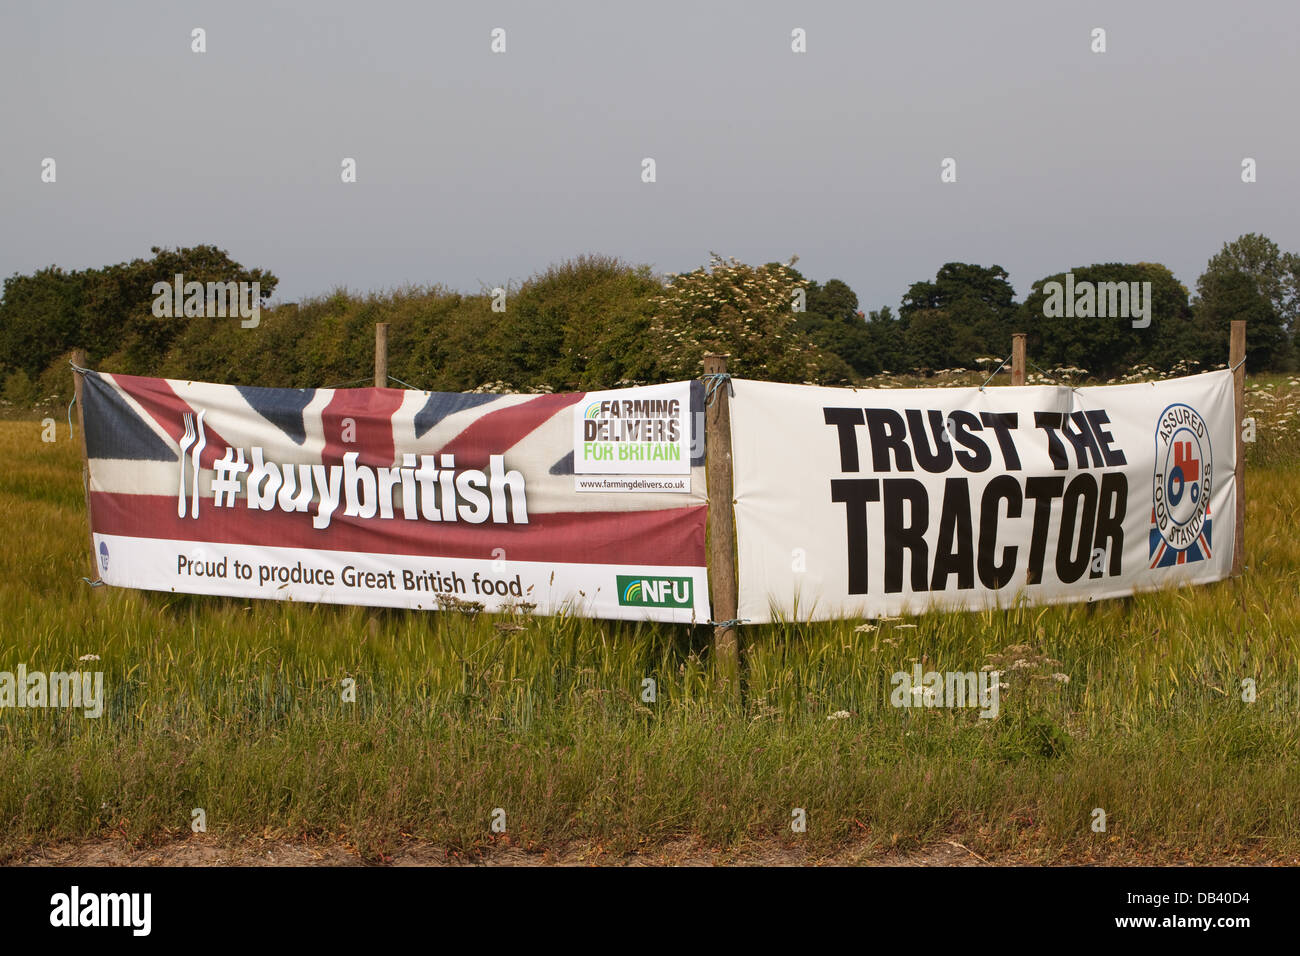 Roadside Field publicity banner, extolling merits of British farming. 'BUYBRITISH'. Farming Delivers for Britain.  NFU. Stock Photo